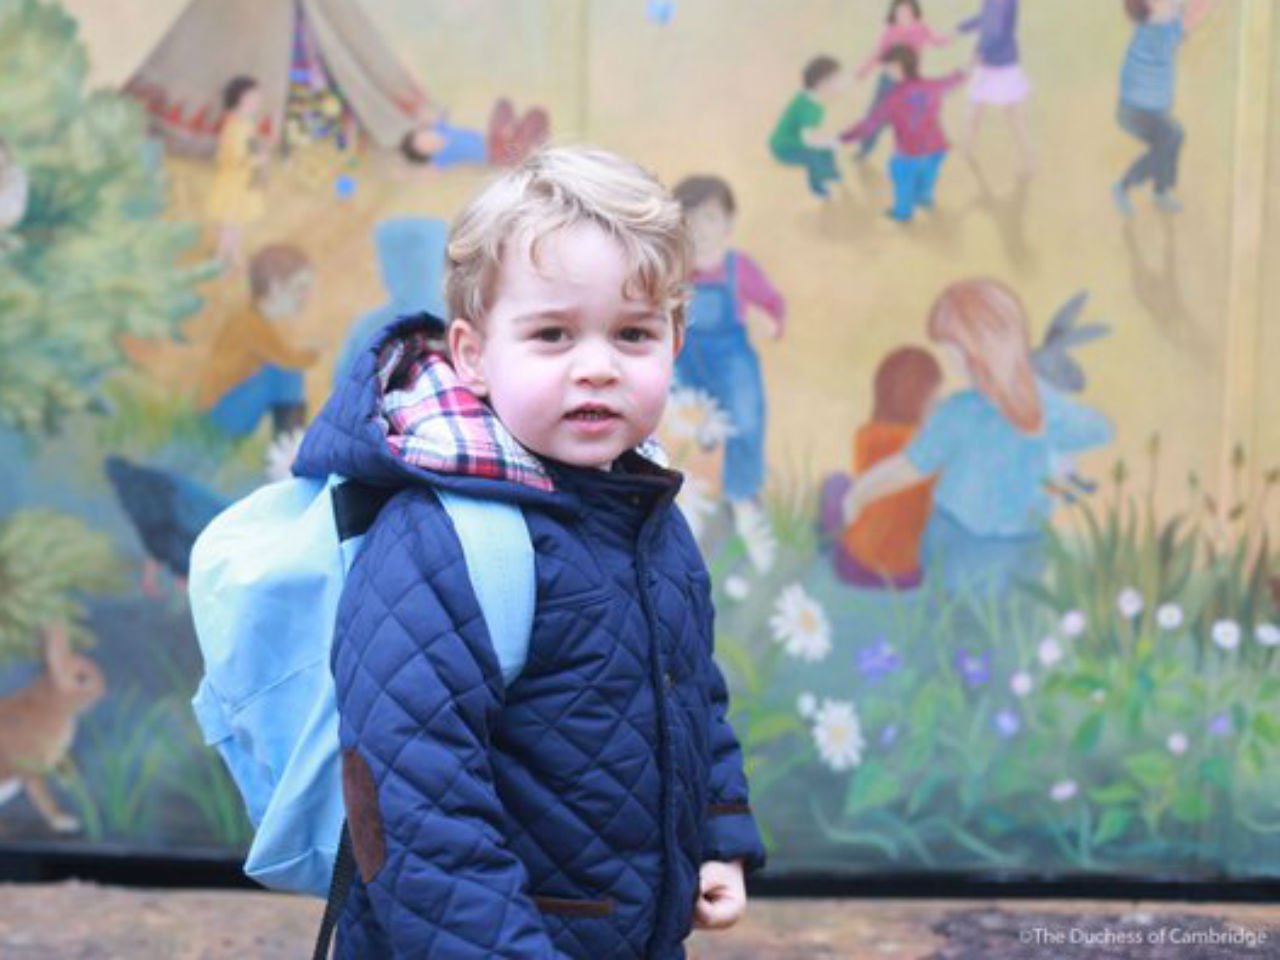 Prince George smiling while wearing a blue backpack